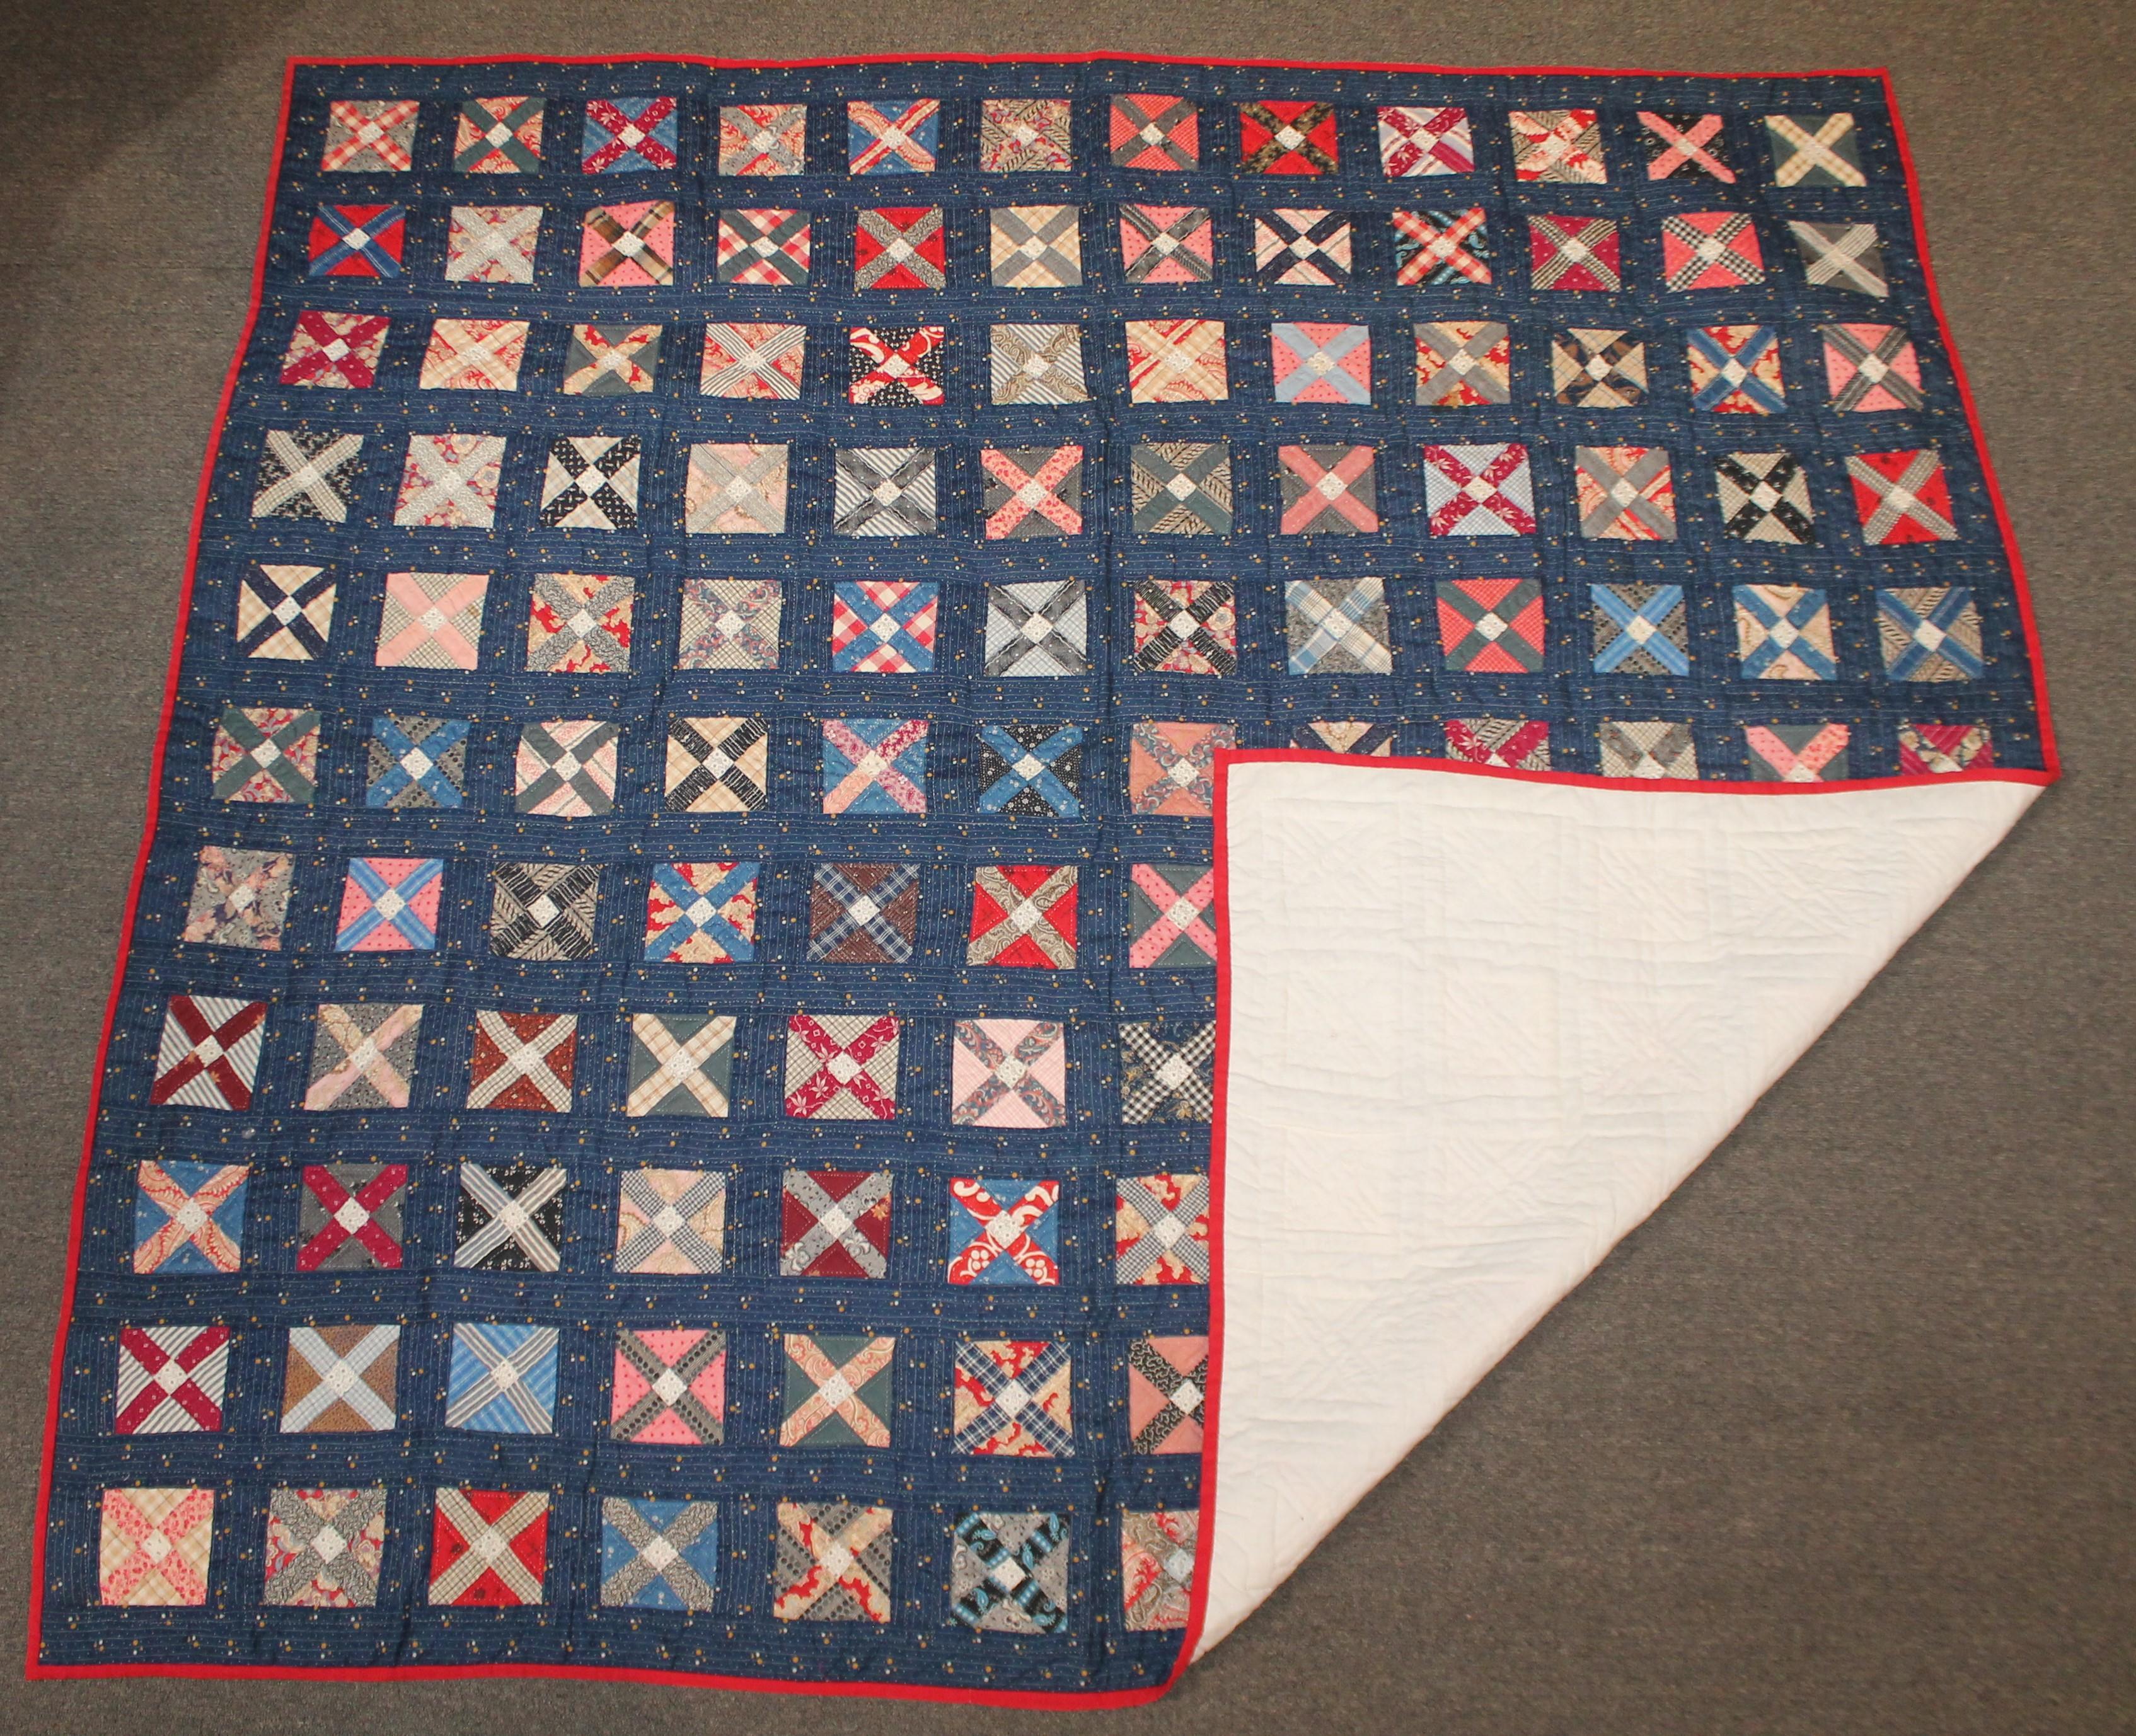 This blue calico four patch or double T's is quite unusual pattern. The condition and quilting is very good with very tight stitches. This quilt is unwashed and looks like never used.